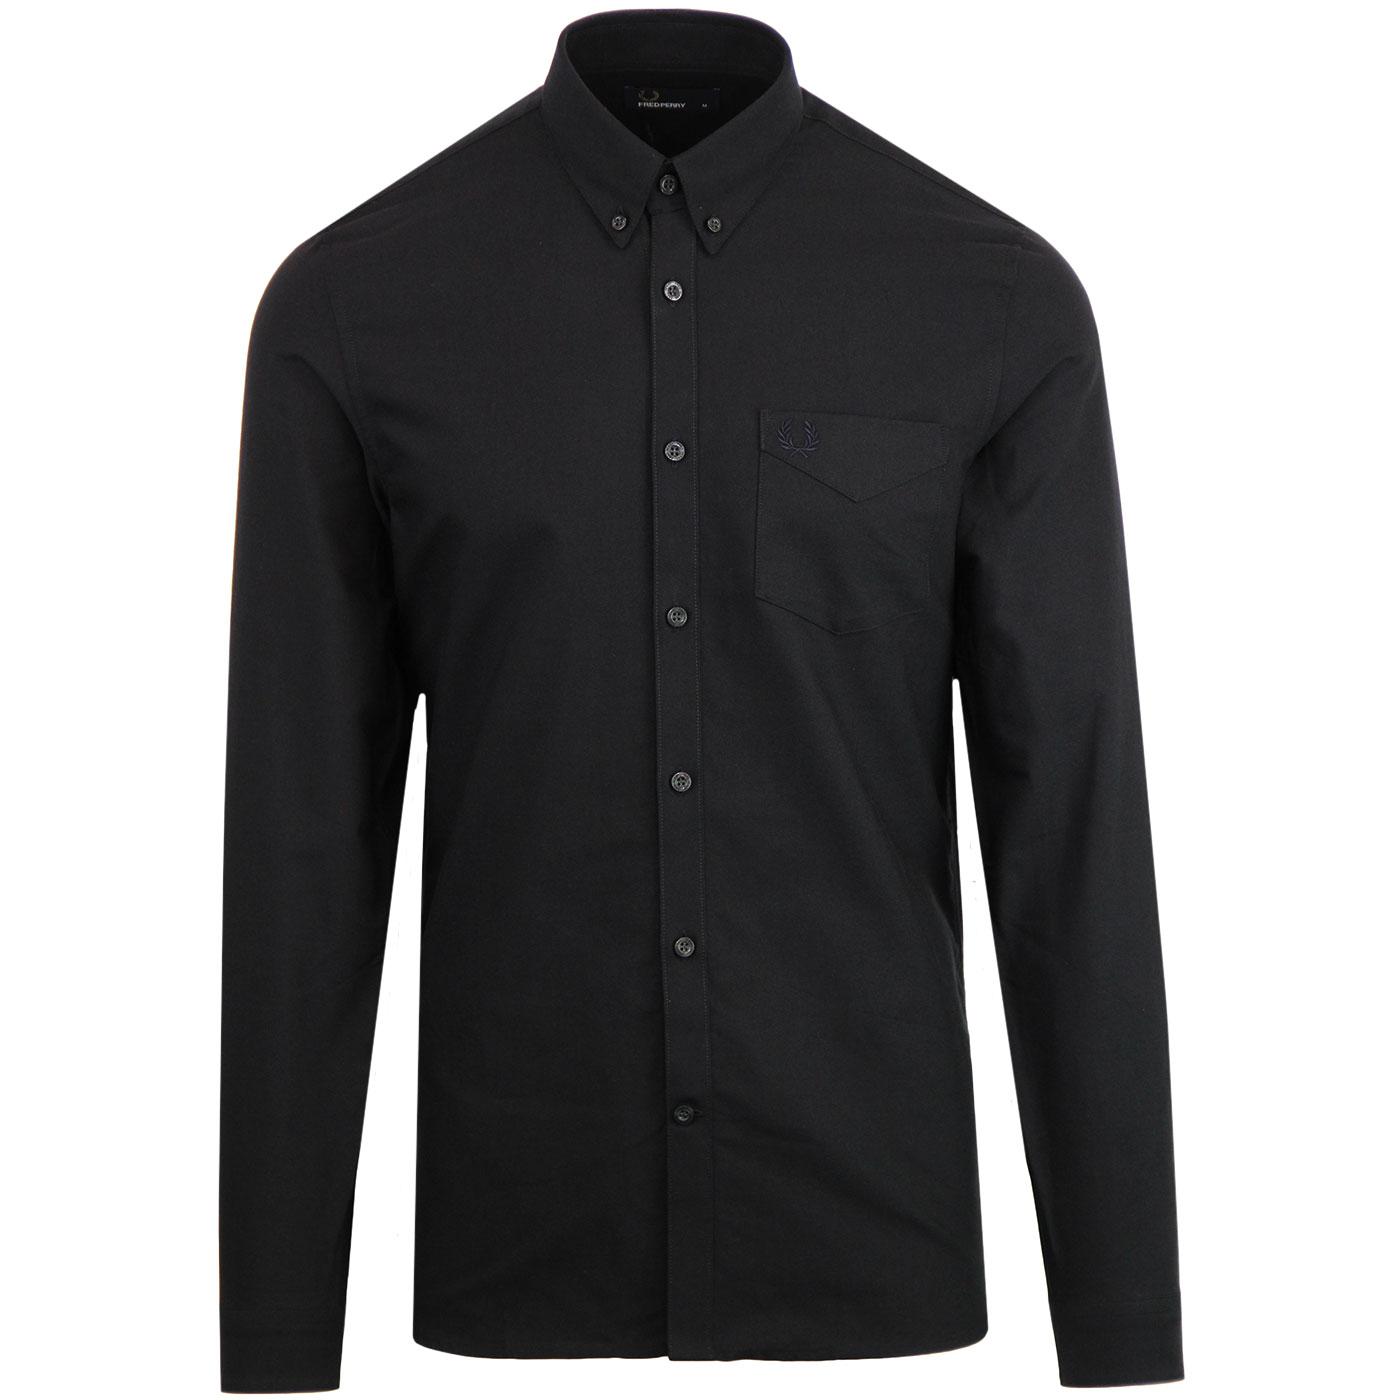 FRED PERRY Classic 60s Mod Button Down Oxford Shirt Black